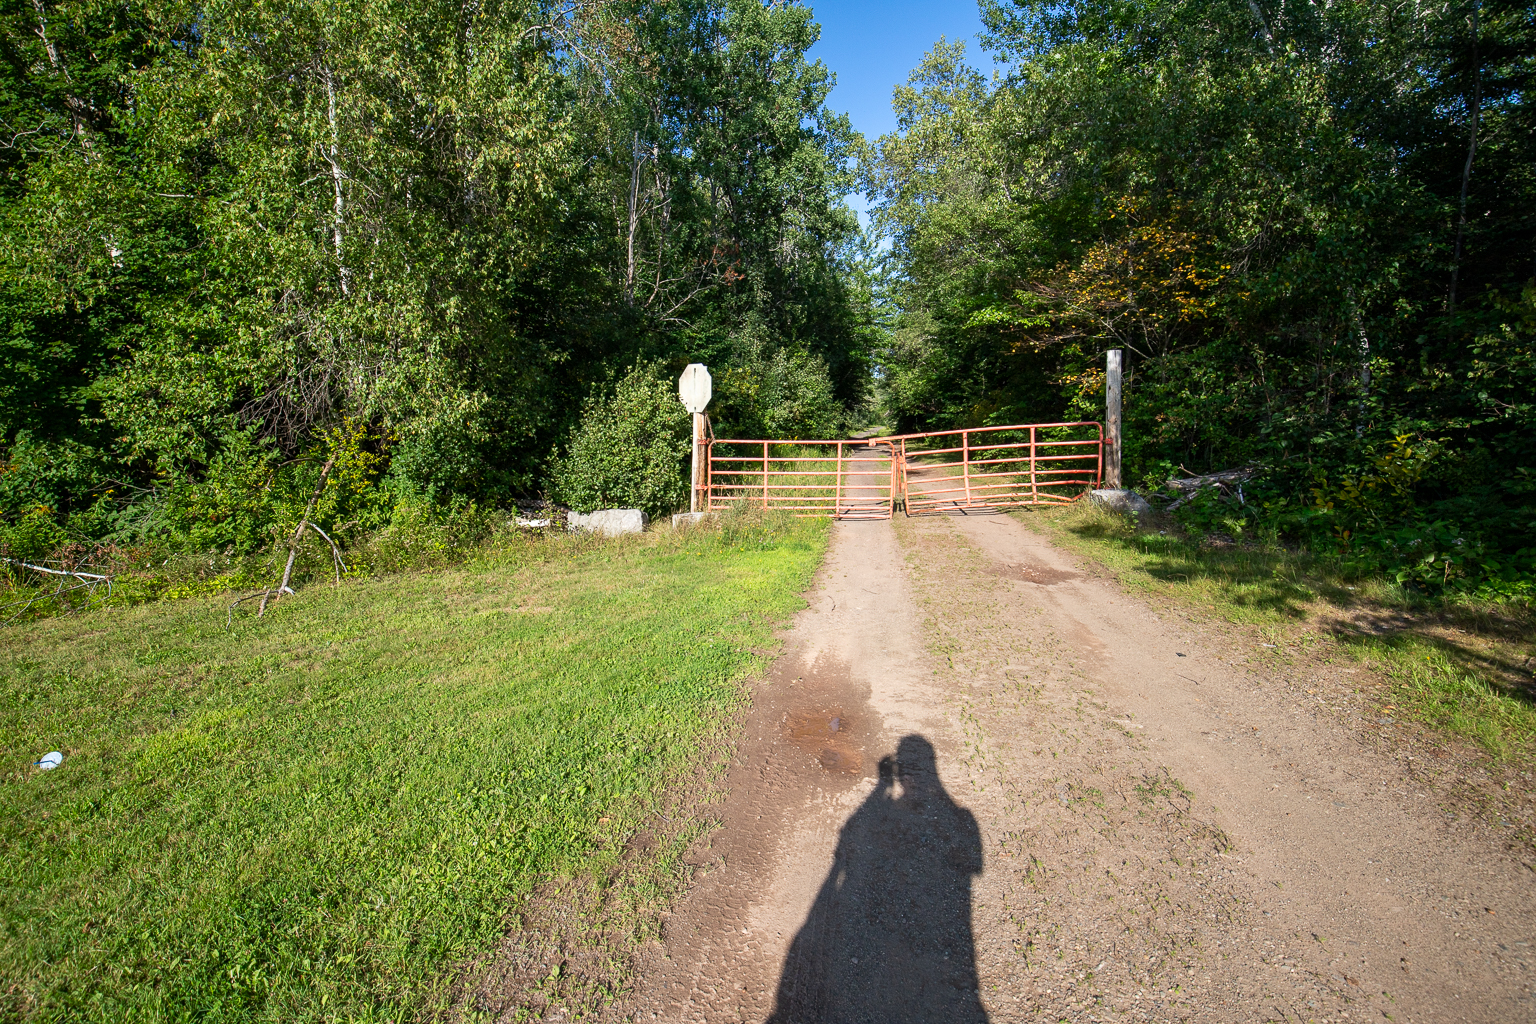 The gated road that accesses several of the trails